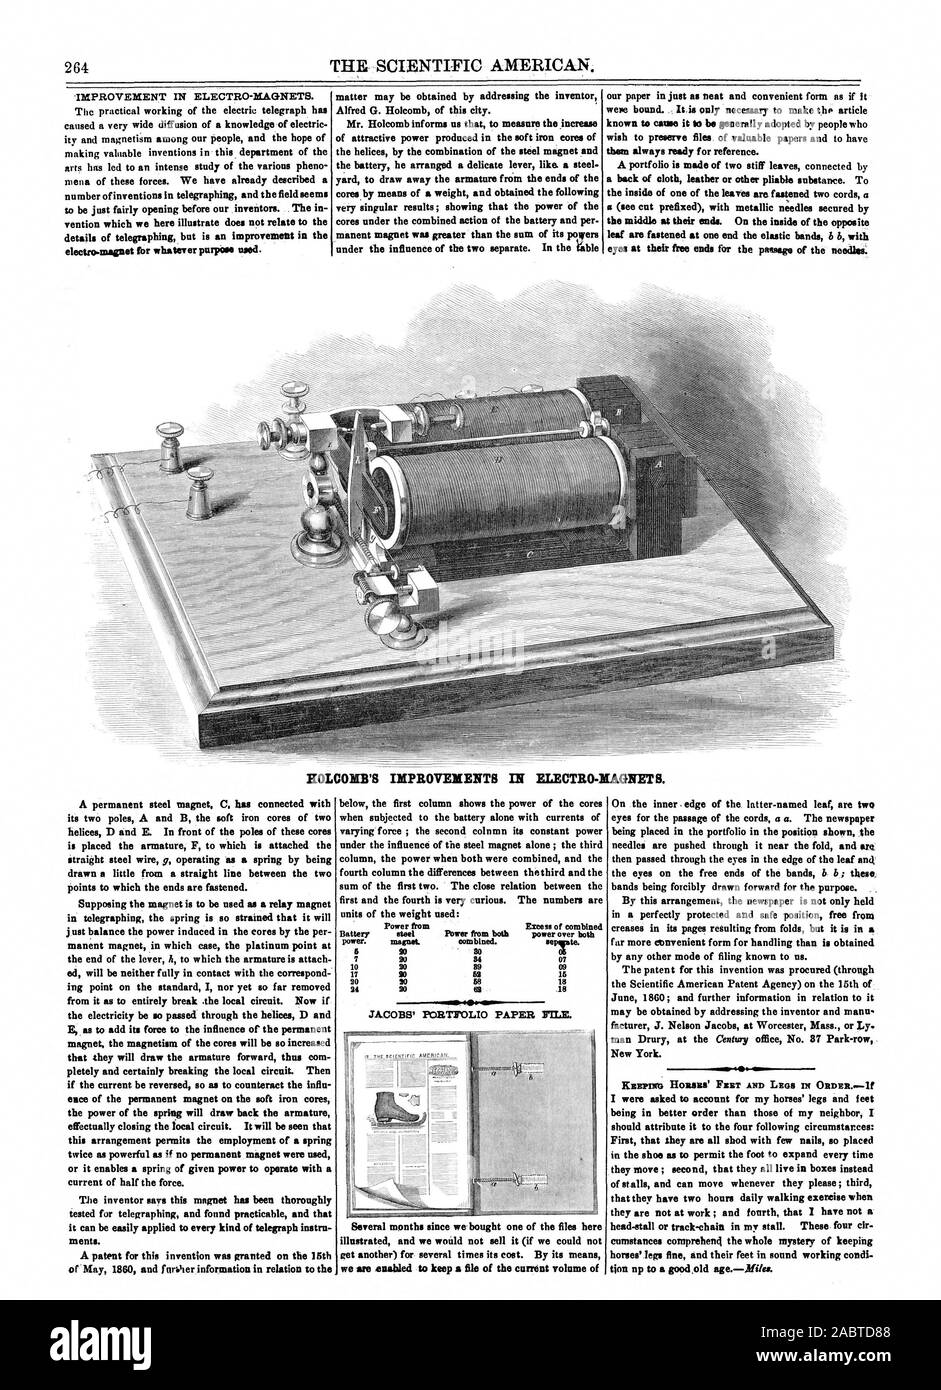 electro-magnet for whatever purpose used. matter may be obtained by addressing the inventor wish to preserve files of valuable papers and to have them always ready for reference. the middle at their ends. On the inside of the opposite HOLCOMB'S IMPROVEMENTS IN ELECTRO-MAGNETS. A permanent steel magnet. C. has connected with in telegraphing the spring is so strained that it will just balance the power induced in the cores by the per twice as powerful as if no permanent magnet were used or it enables a spring of given power to operate with a of May 1860 and further information in relation to the Stock Photo